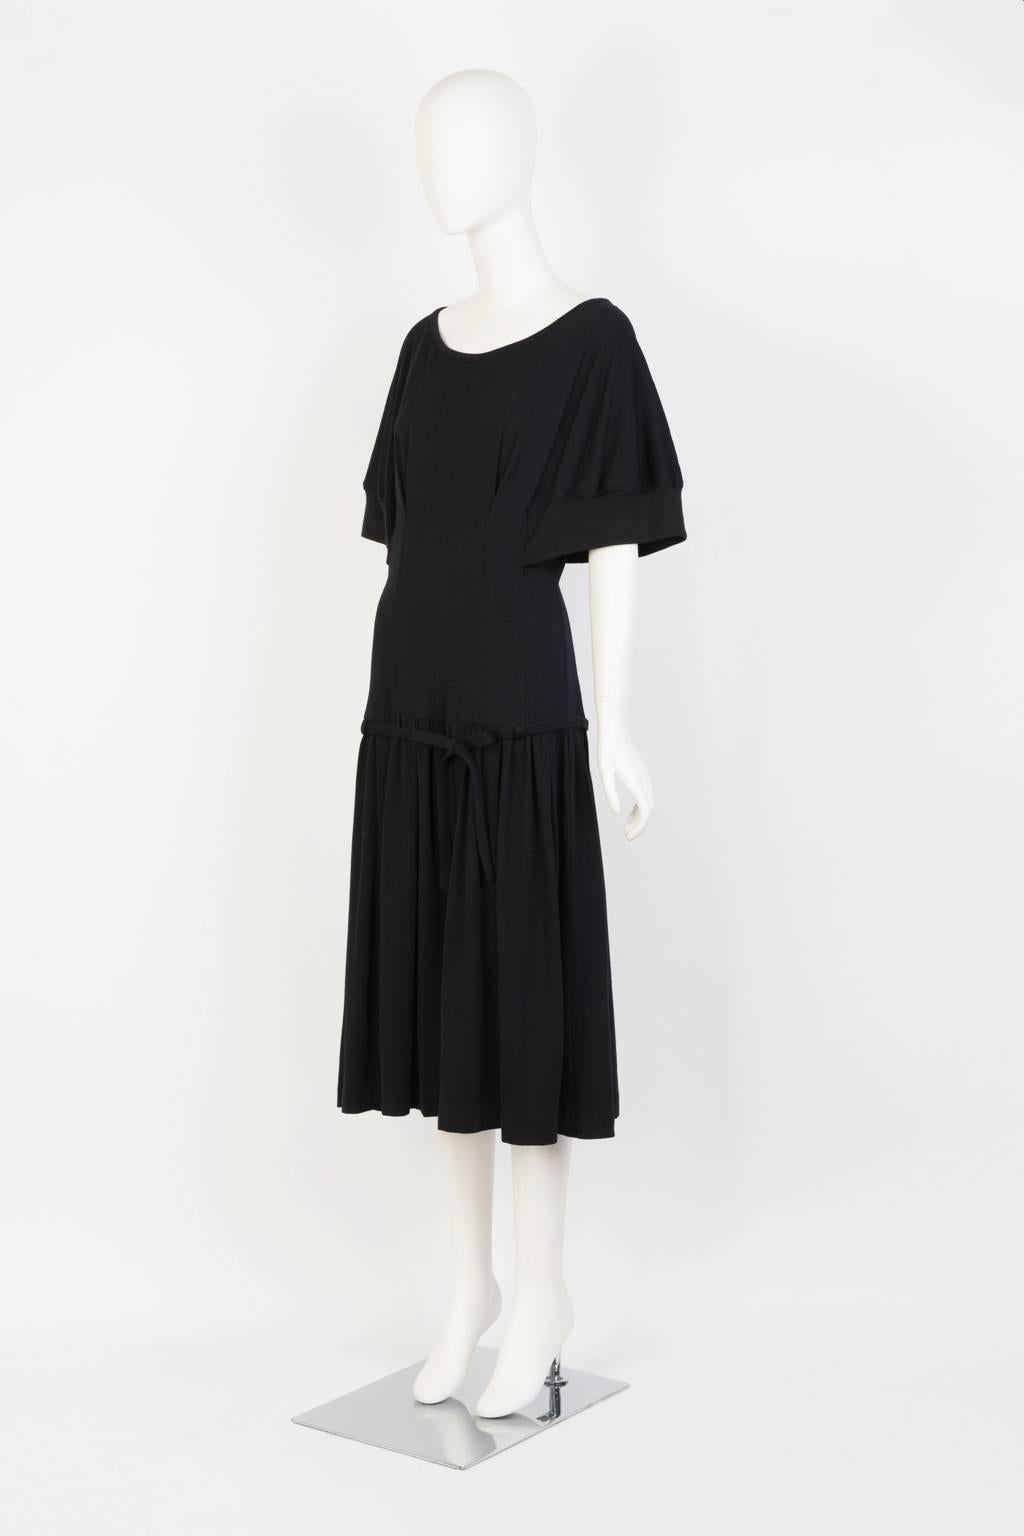 Black knee length dress in lightweight knit with kimono half sleeve and front bow detail and back zip. 